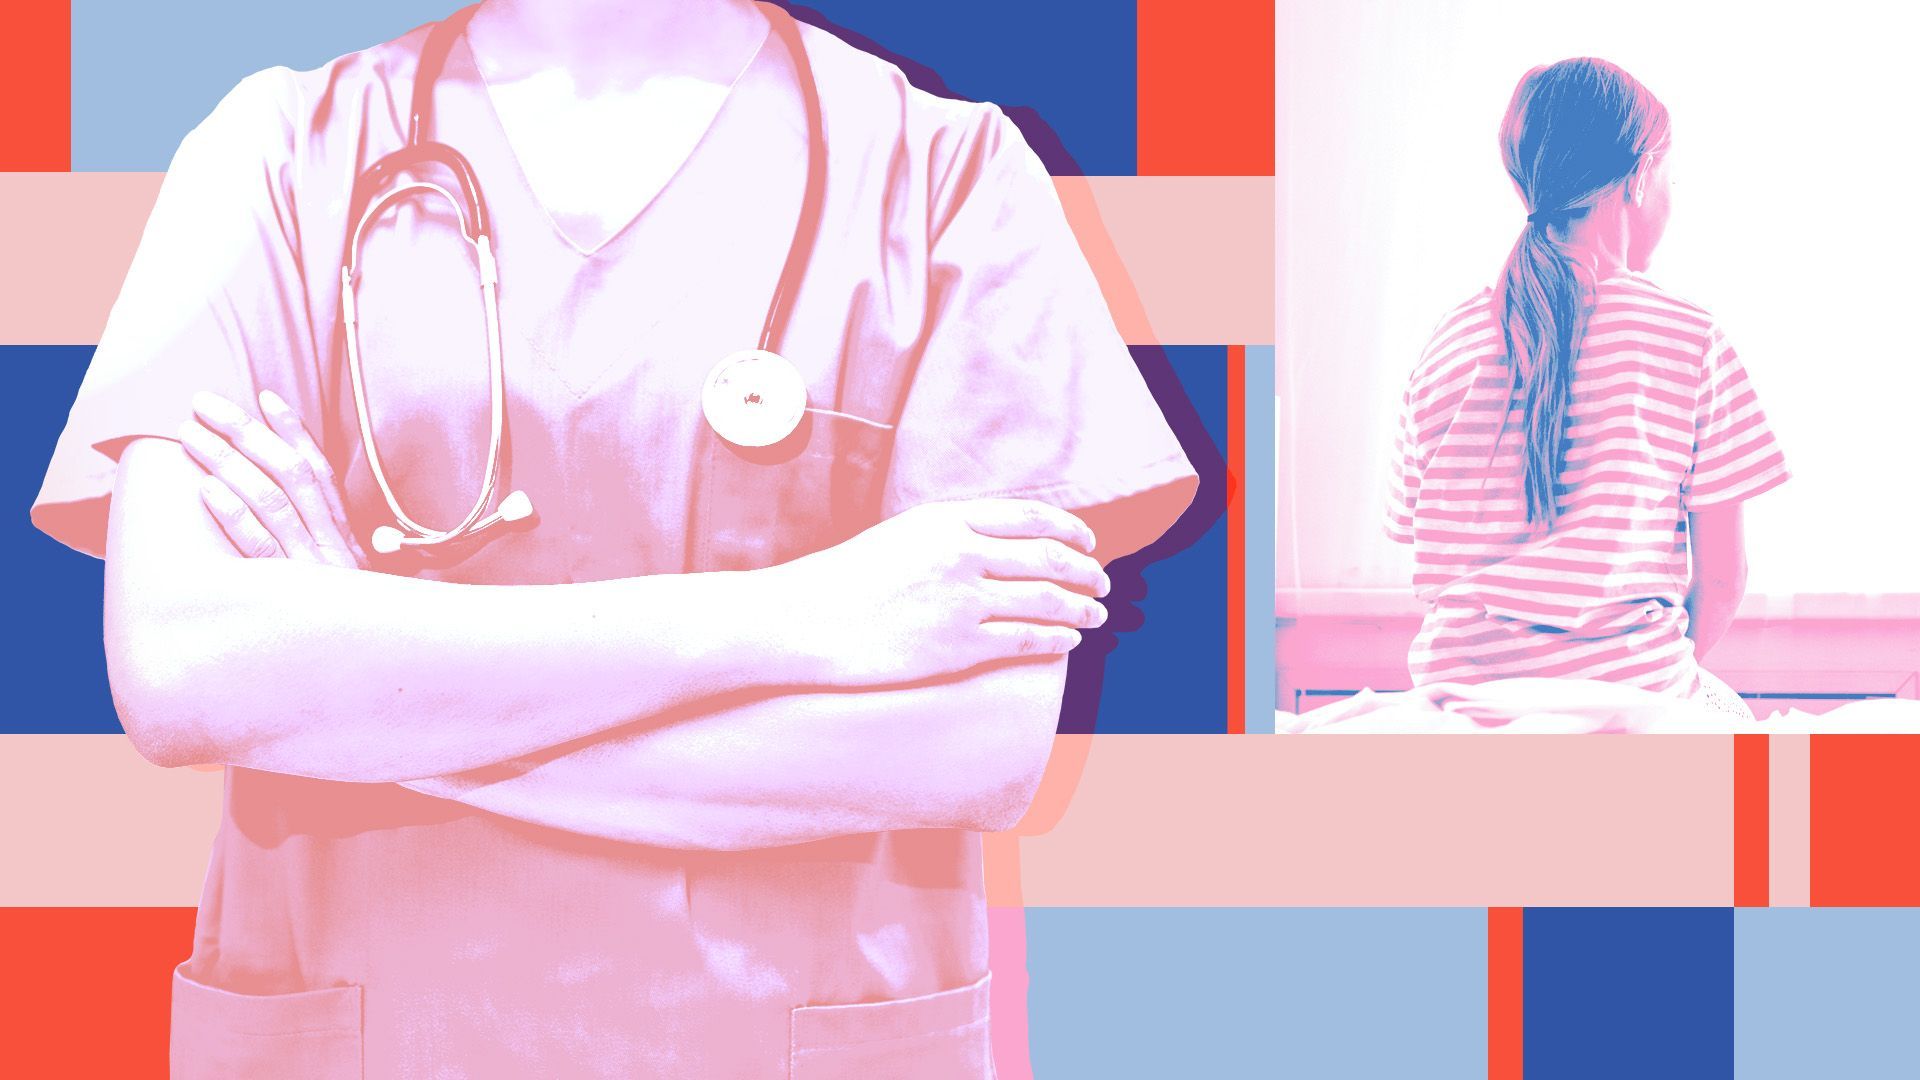 Illustrated college of a doctor with arms crossed next to a photo of child from behind surrounded by shapes and colors of the Trans flag